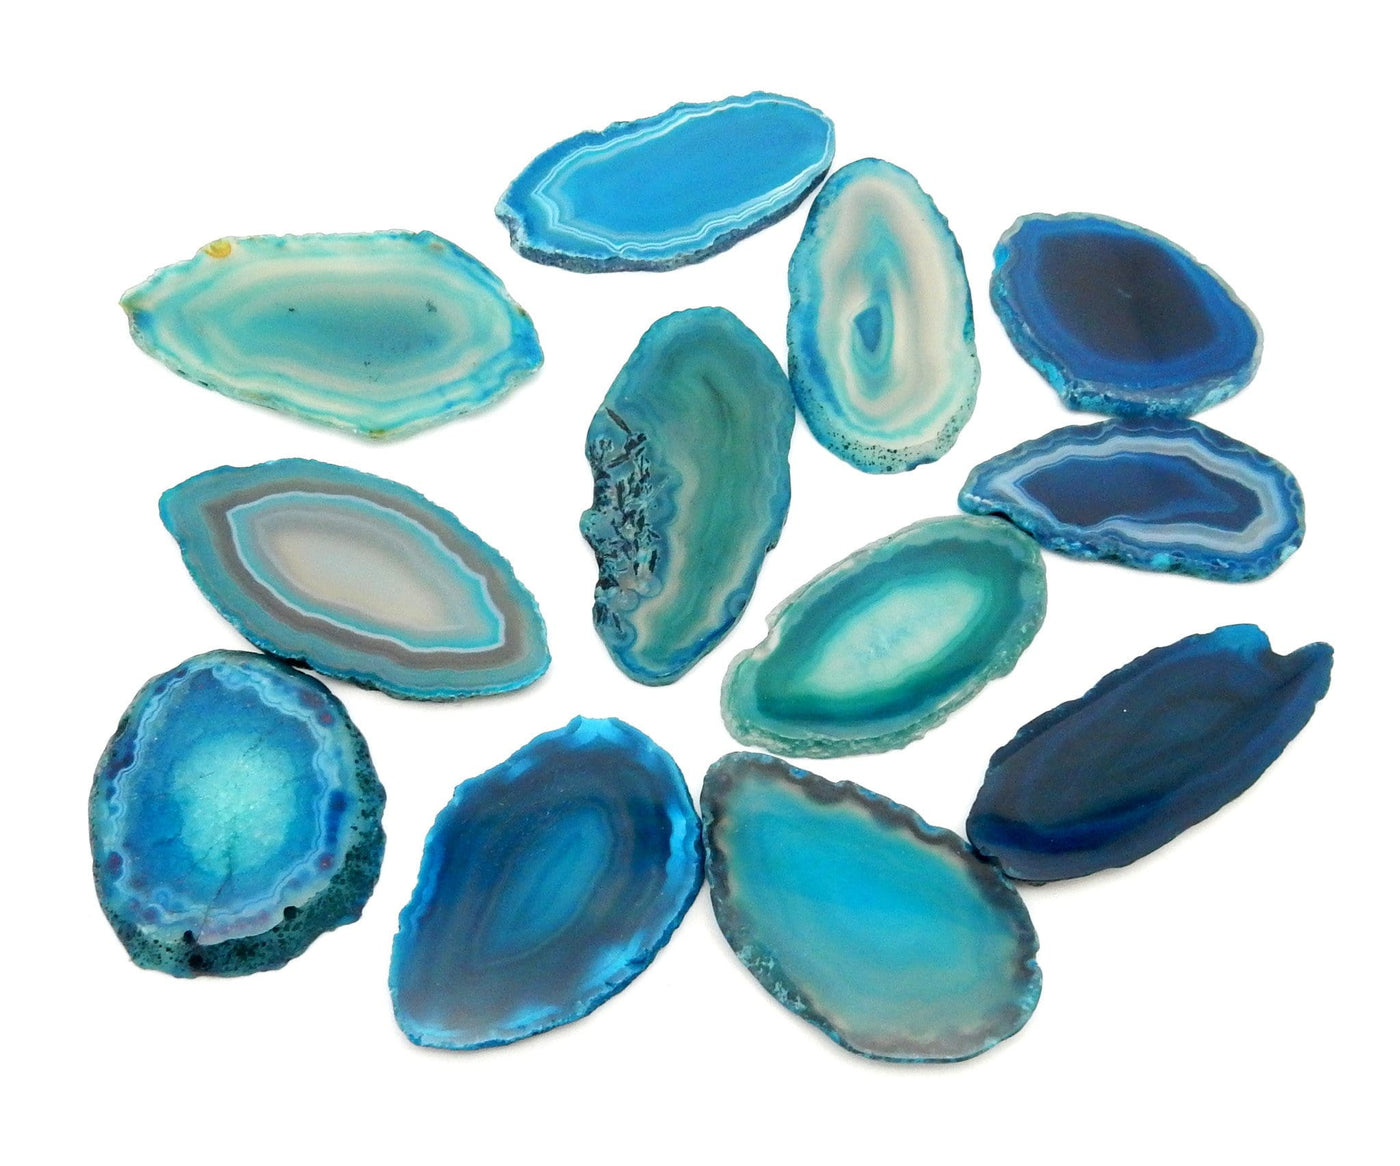 12 pieces Teal Agate Slices - Size 000